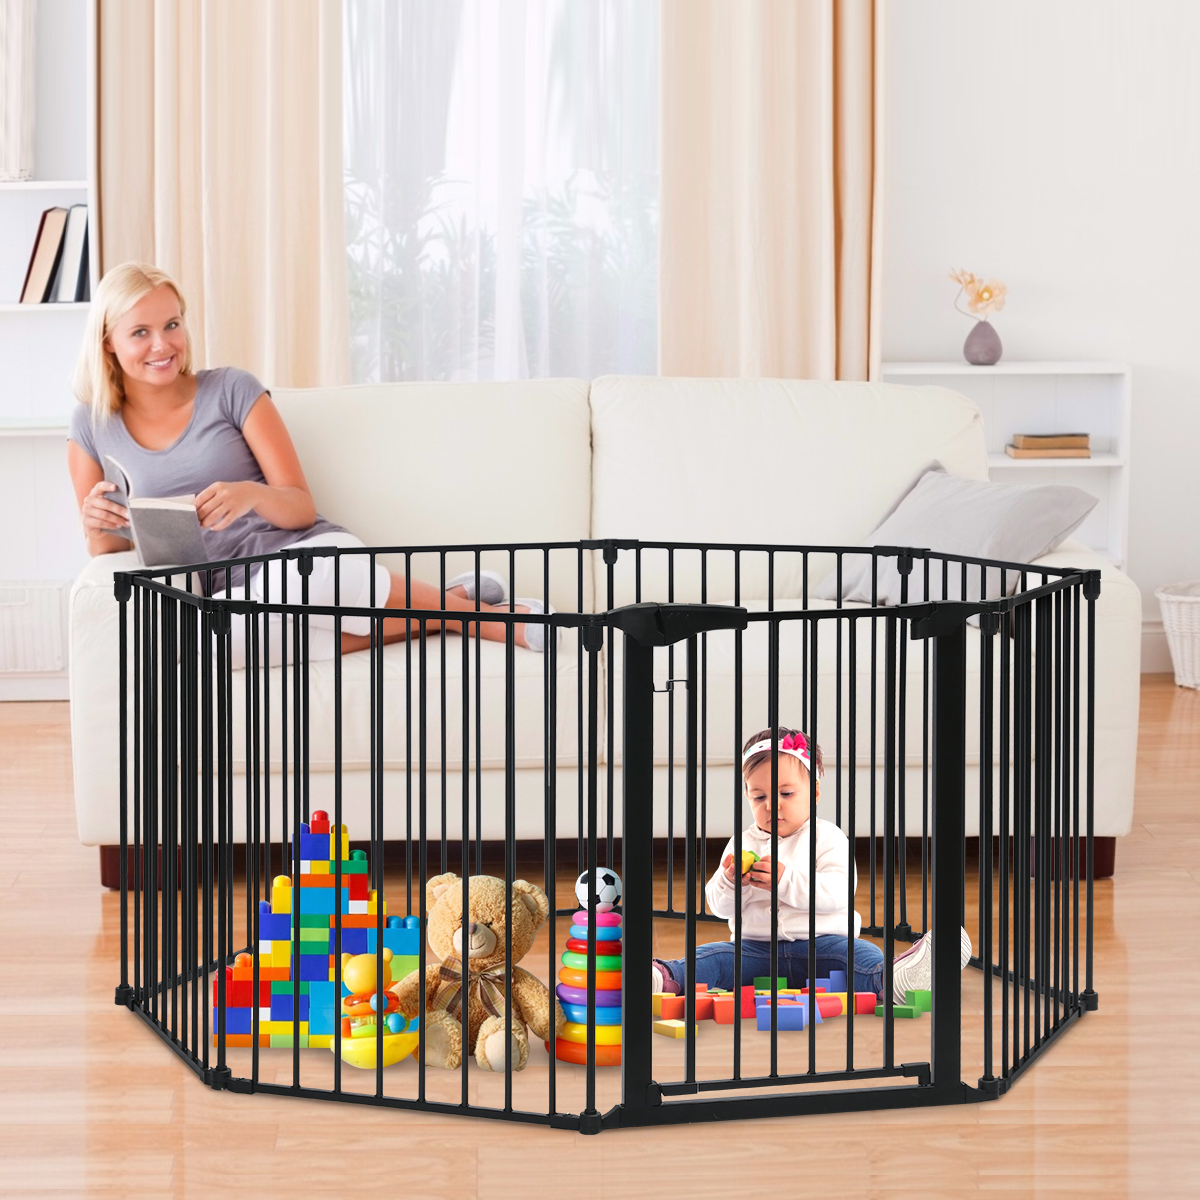 Comomy-198-inch-Long-Baby-Gate-Extra-Wide-Baby-Gate-Play-Yard-8-Panel-Foldable-Safety-Gate-for-Pet-C-1933282-4